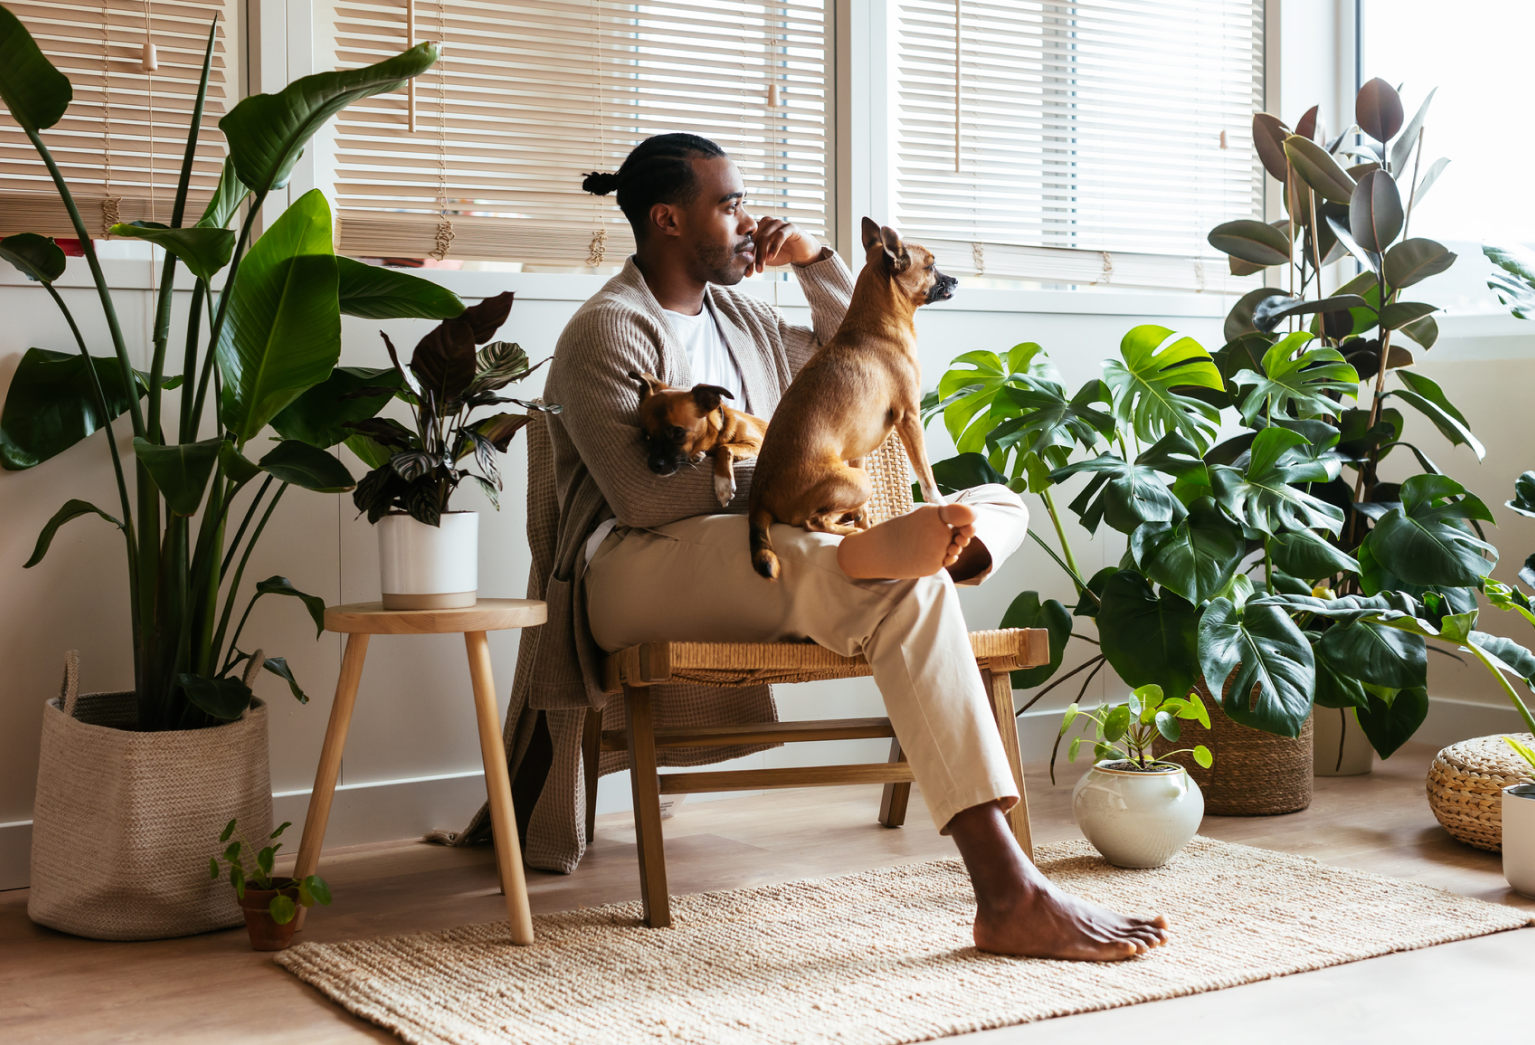 Image of renter sitting with a dog in their apartment surrounded by plants